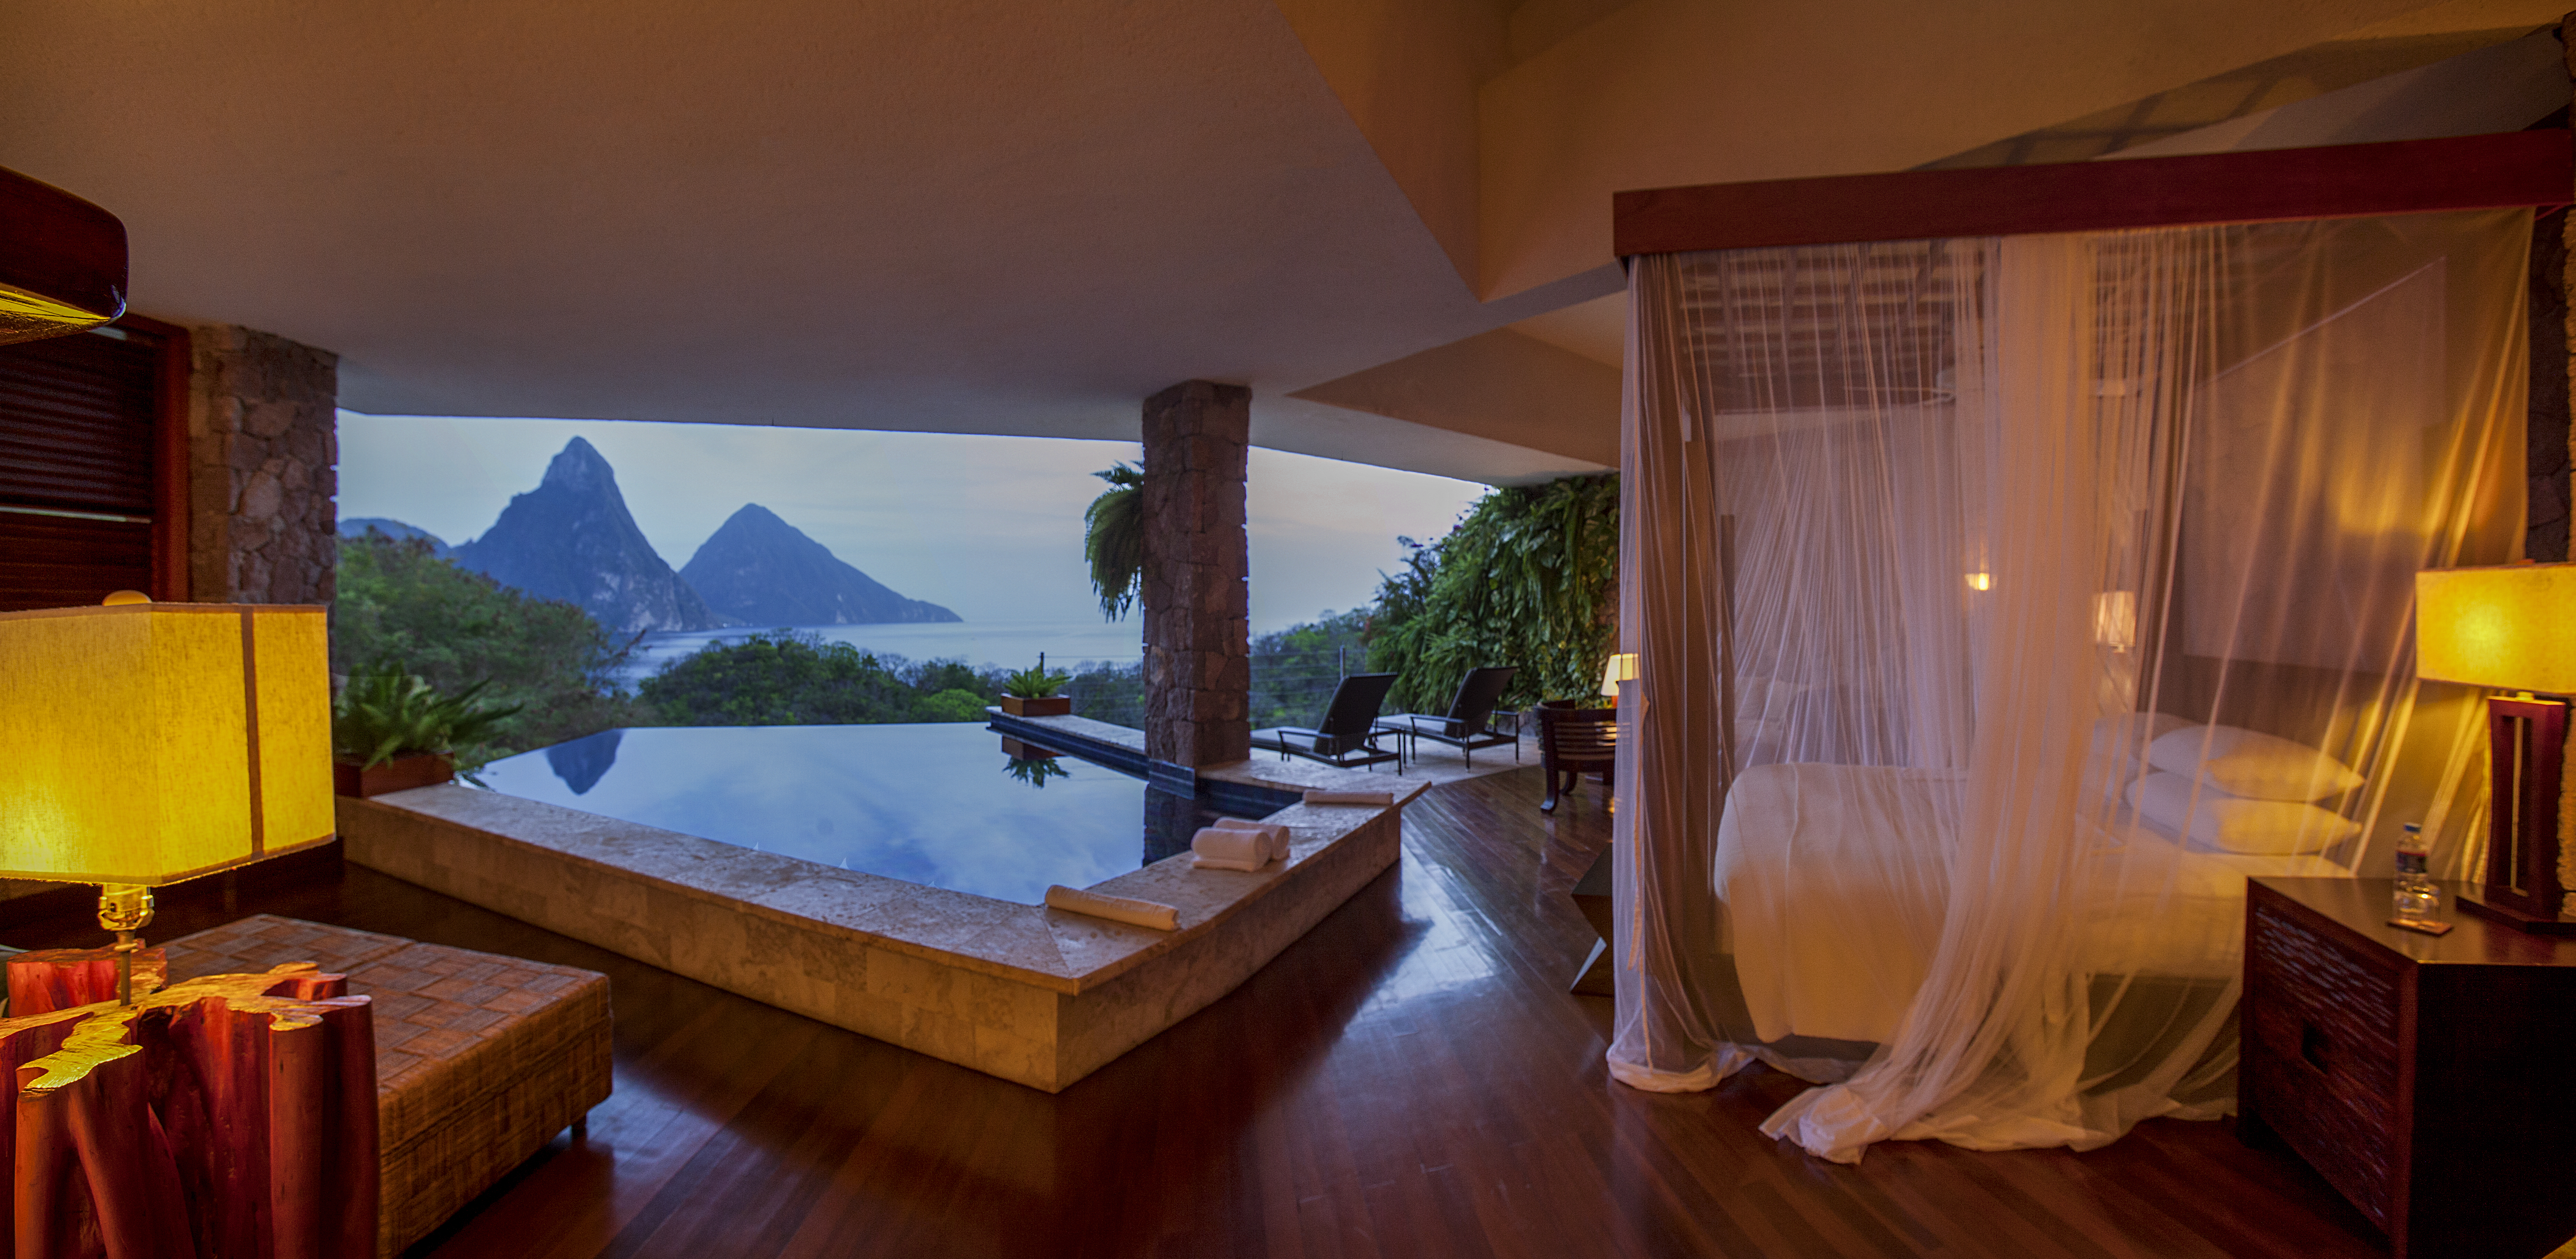 The Bachelor 2014 Filming Locations in Saint Lucia | St. Lucia Hotels and Resorts | Juan Puablo Fantasy Suites | Jade Mountain